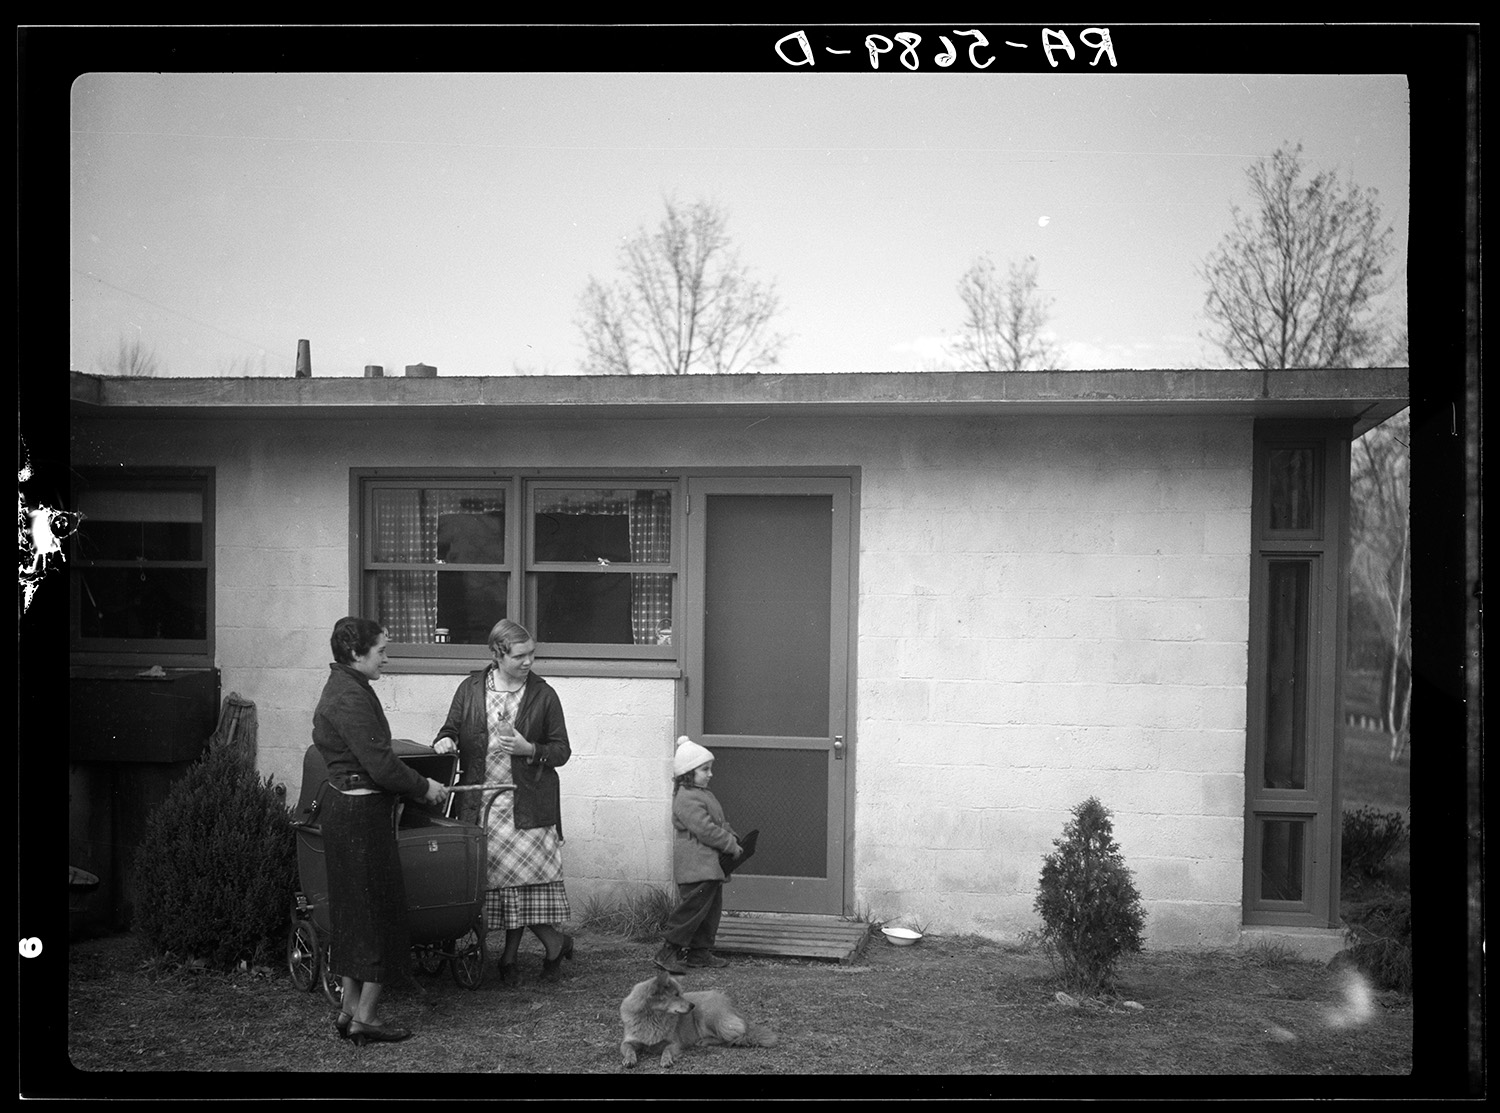 A black-and-white photo showing two women standing outside a modest house, with a young child and dog.